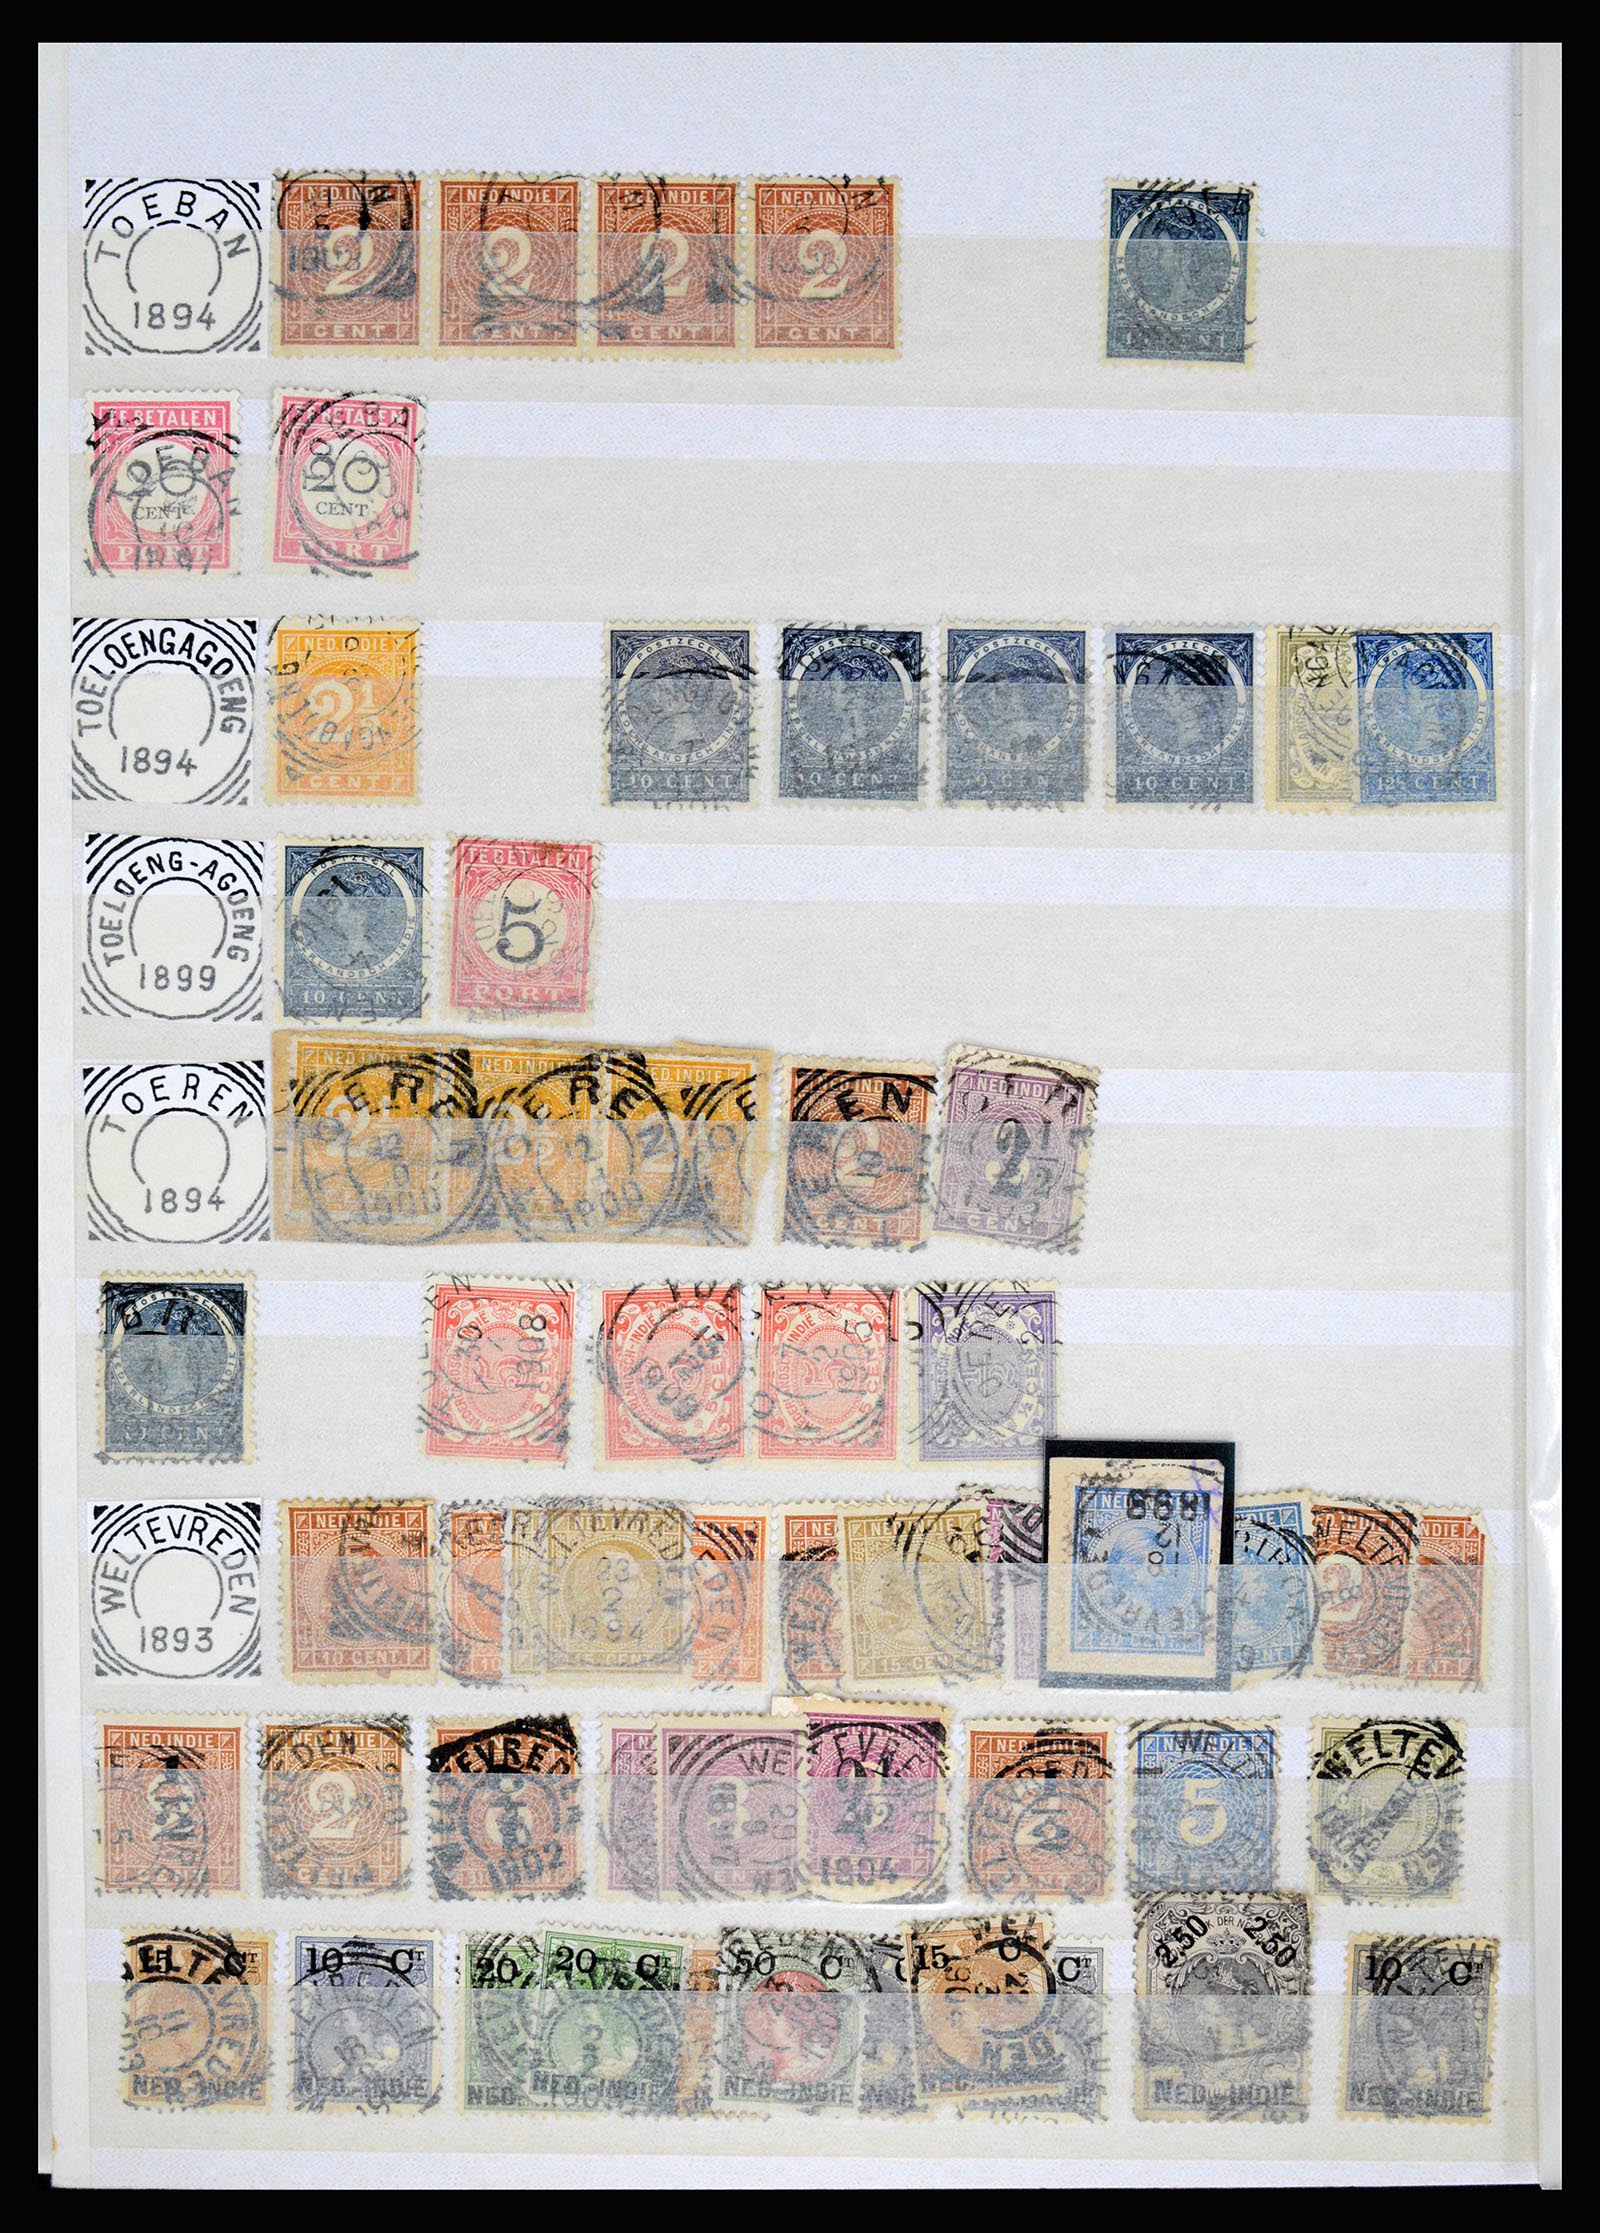 36839 099 - Stamp collection 36839 Dutch east Indies square cancels.